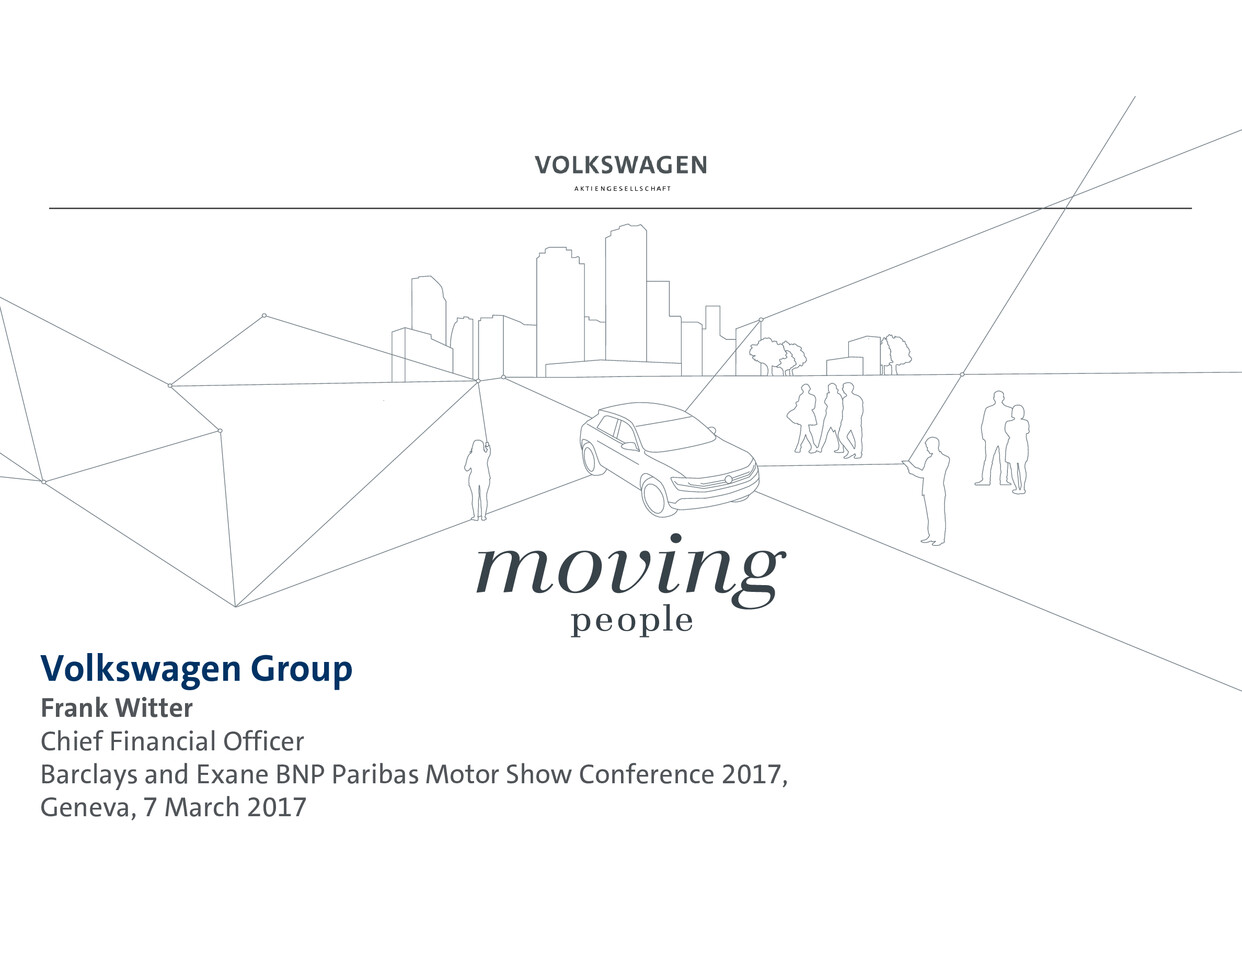 Volkswagen Group Presentation - Barclays and Exane BNP Paribas Motor Show Conference 2017